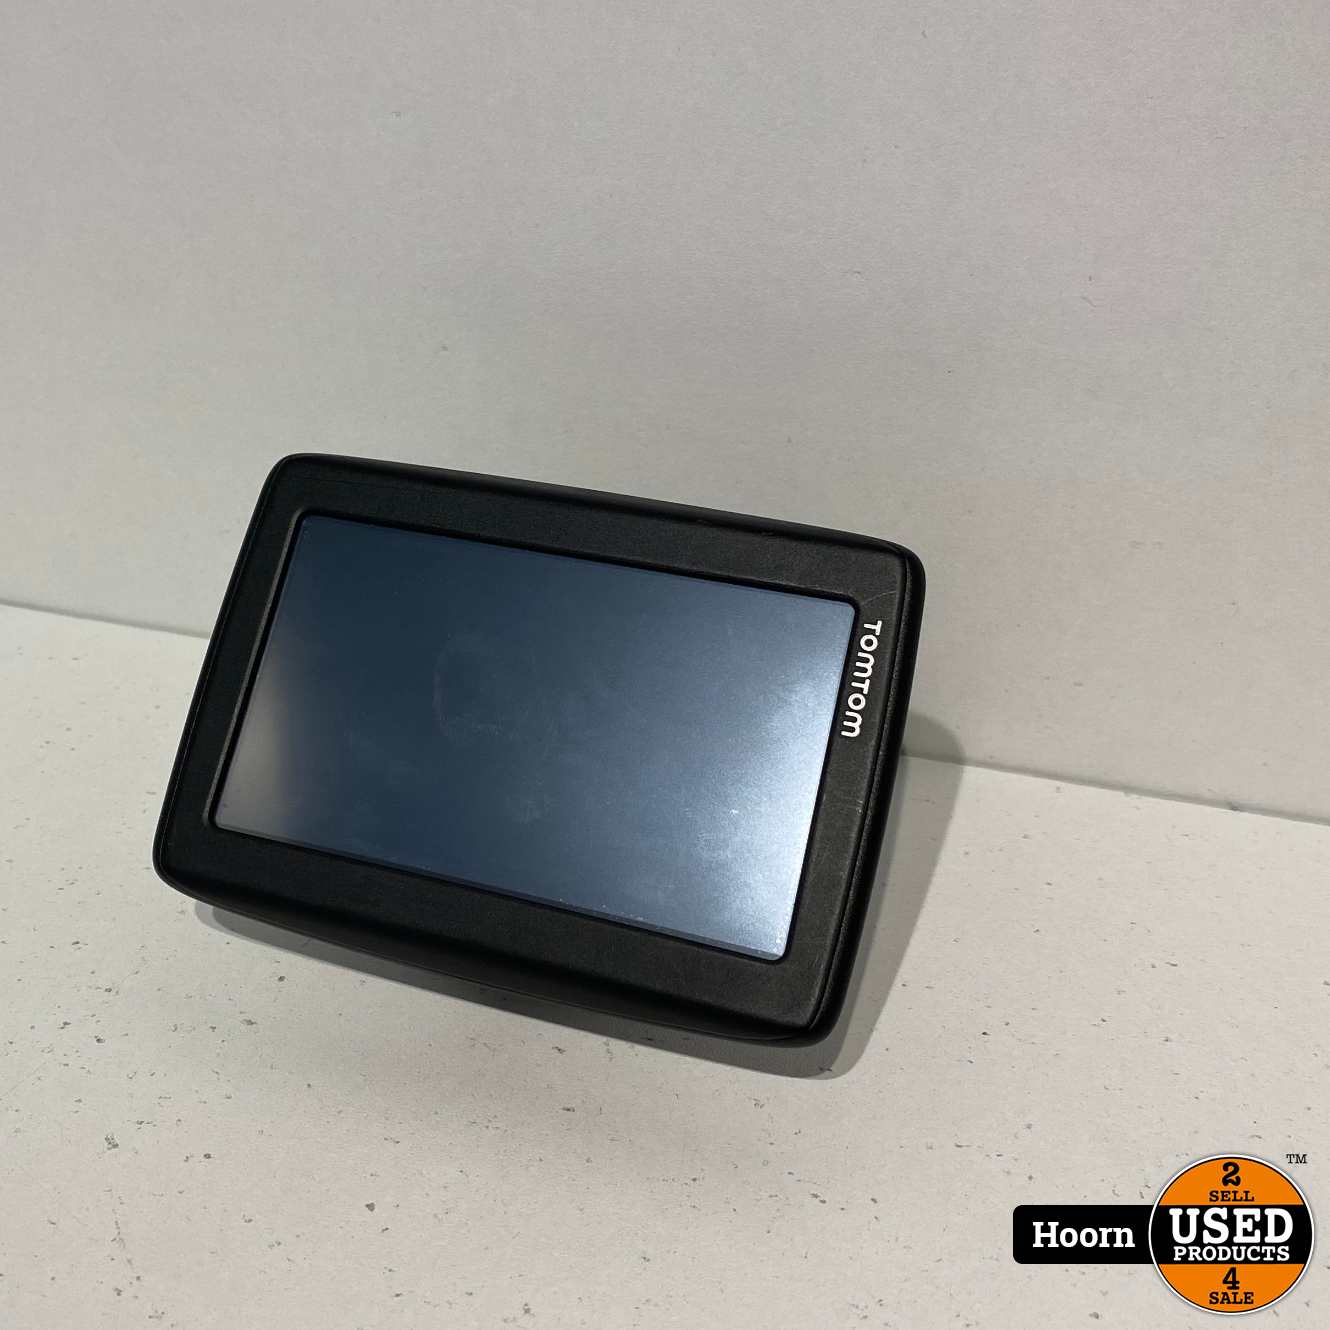 TomTom Z1230 Navigatiesysteem Lader Europa - Used Products Hoorn